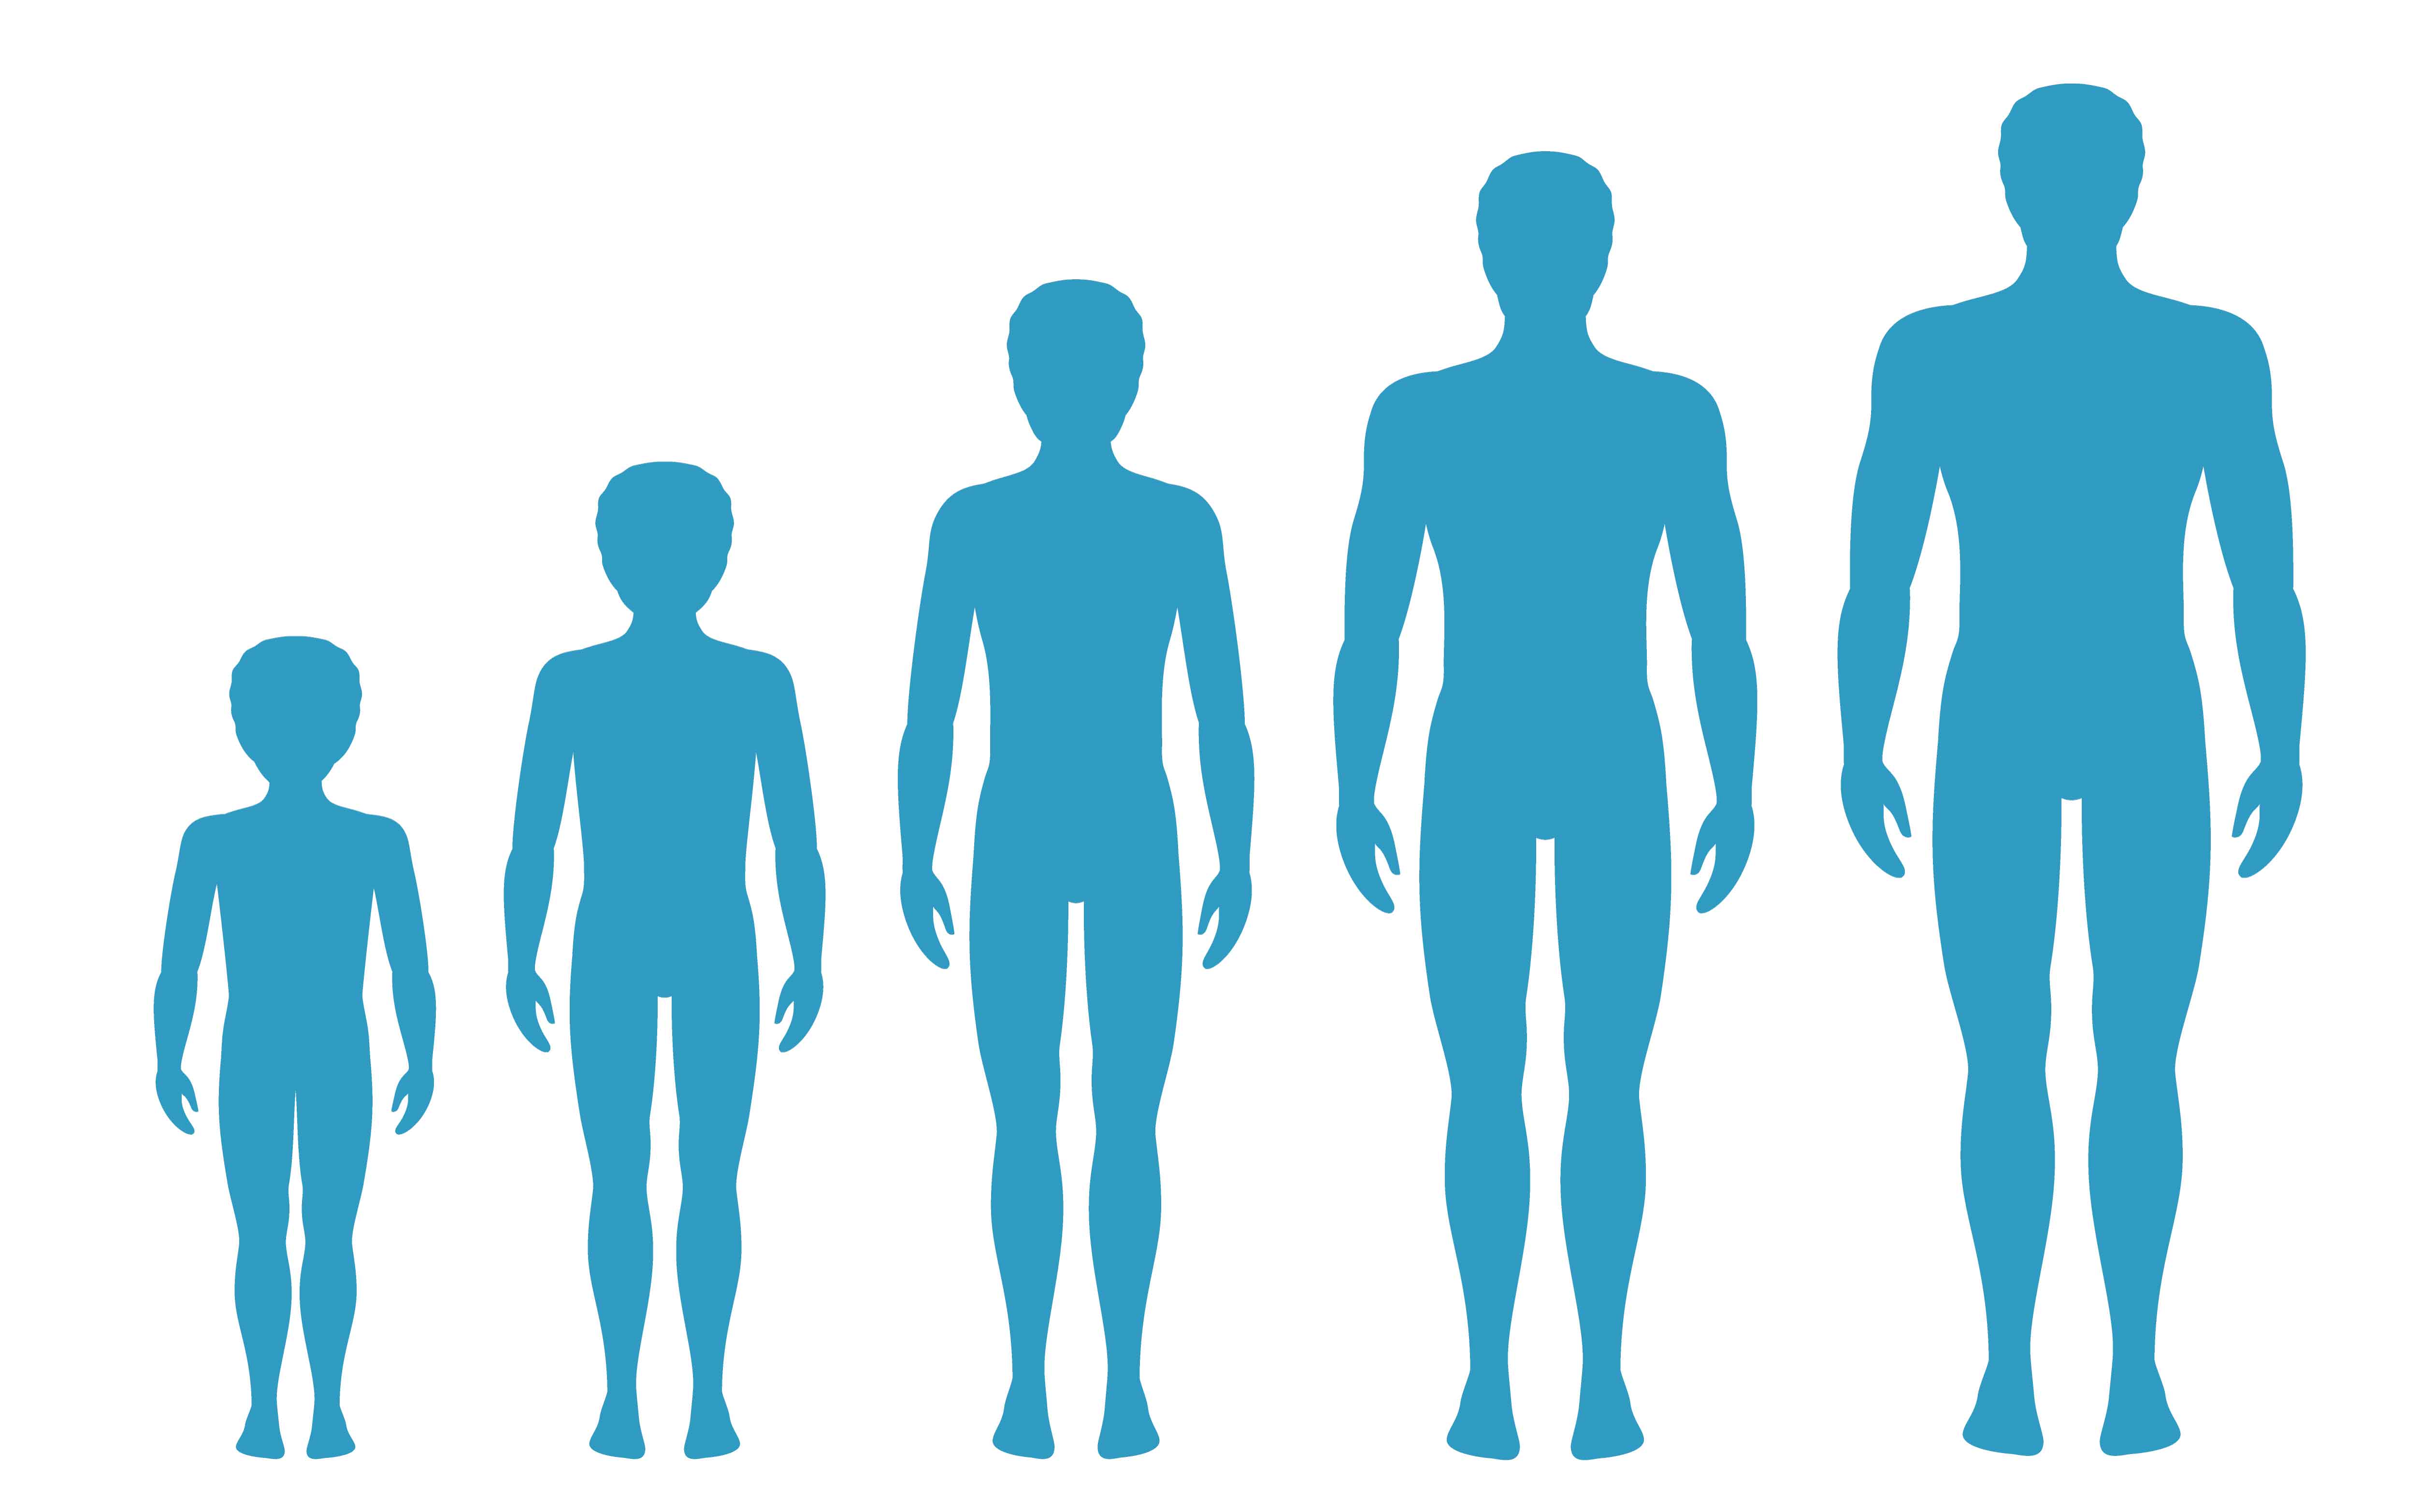 Man's body proportions changing with age. Boy's body growth stages